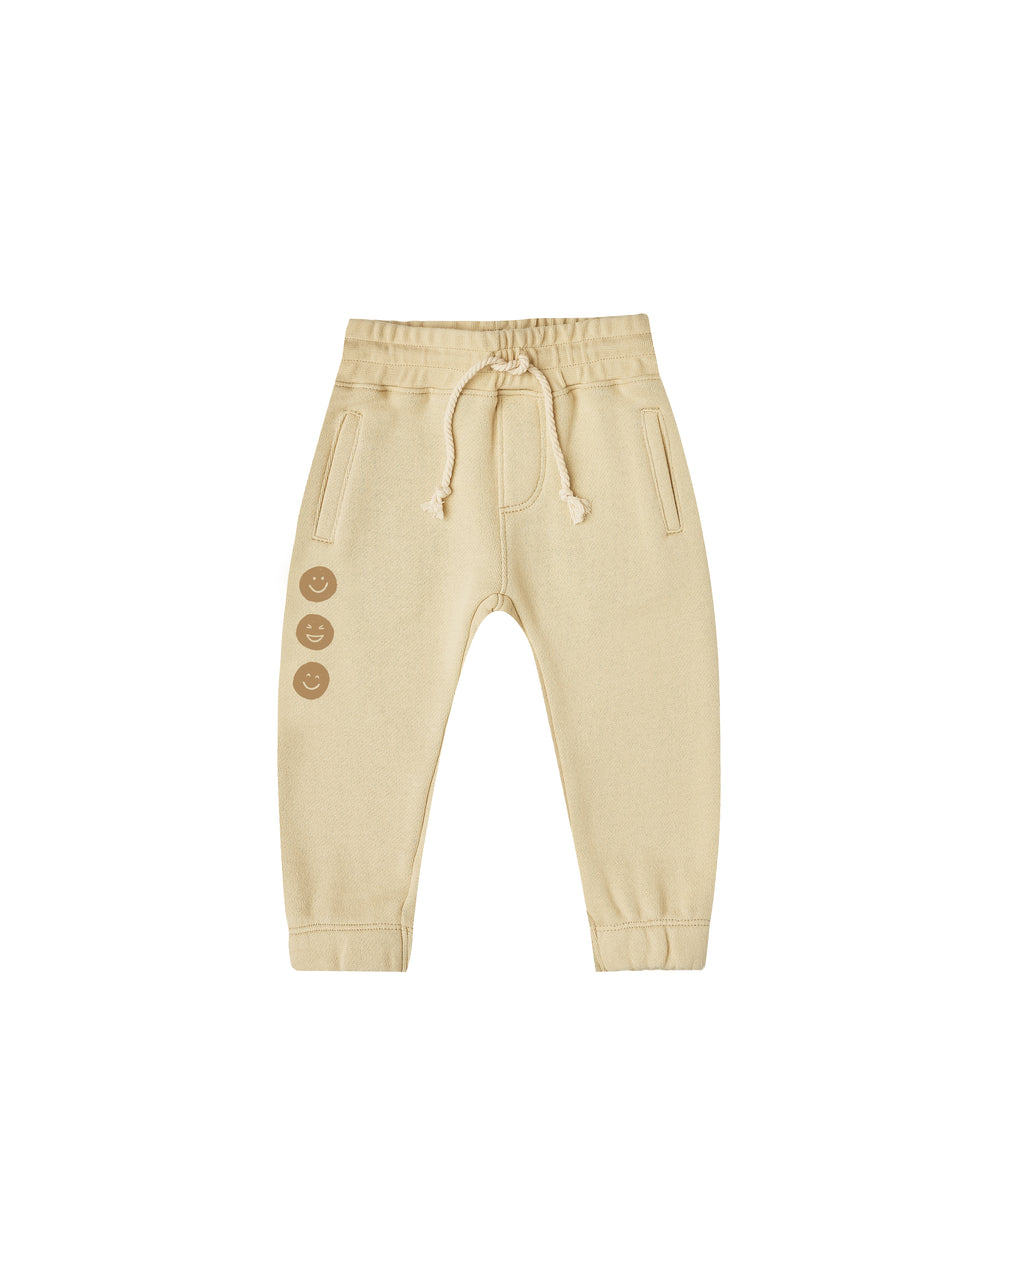 Rylee + Cru Happy Face Jogger Pant - Butter